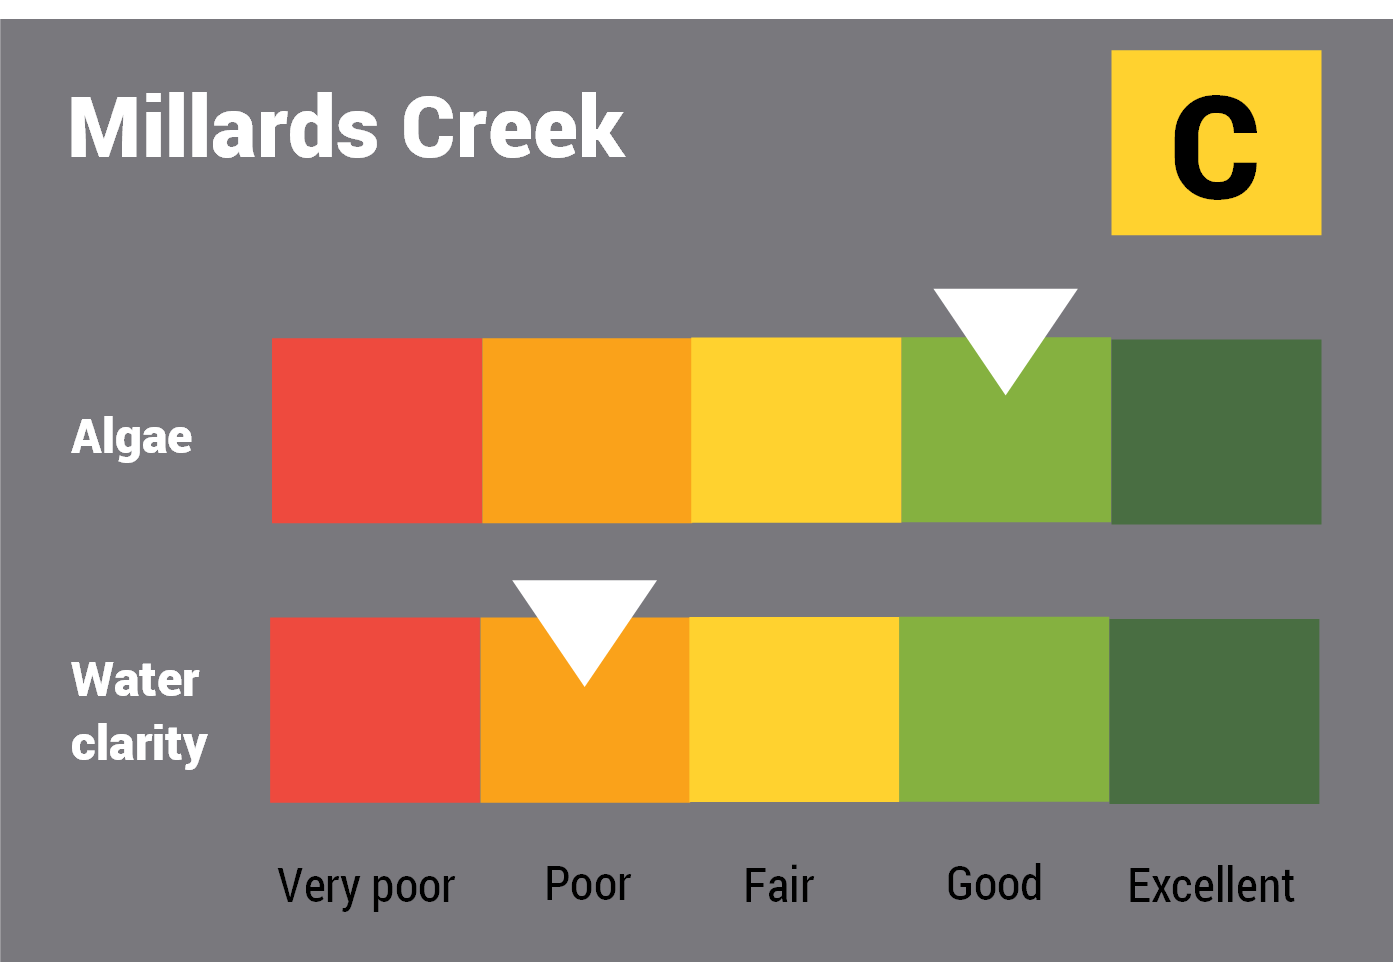 Millards Creek water quality report card for algae and water clarity showing colour-coded ratings (red, orange, yellow, light green and dark green, which represent very poor, poor, fair, good and excellent, respectively). Algae is rated 'poor' and water clarity is rated 'good' giving an overall rating of 'fair' or 'C'.